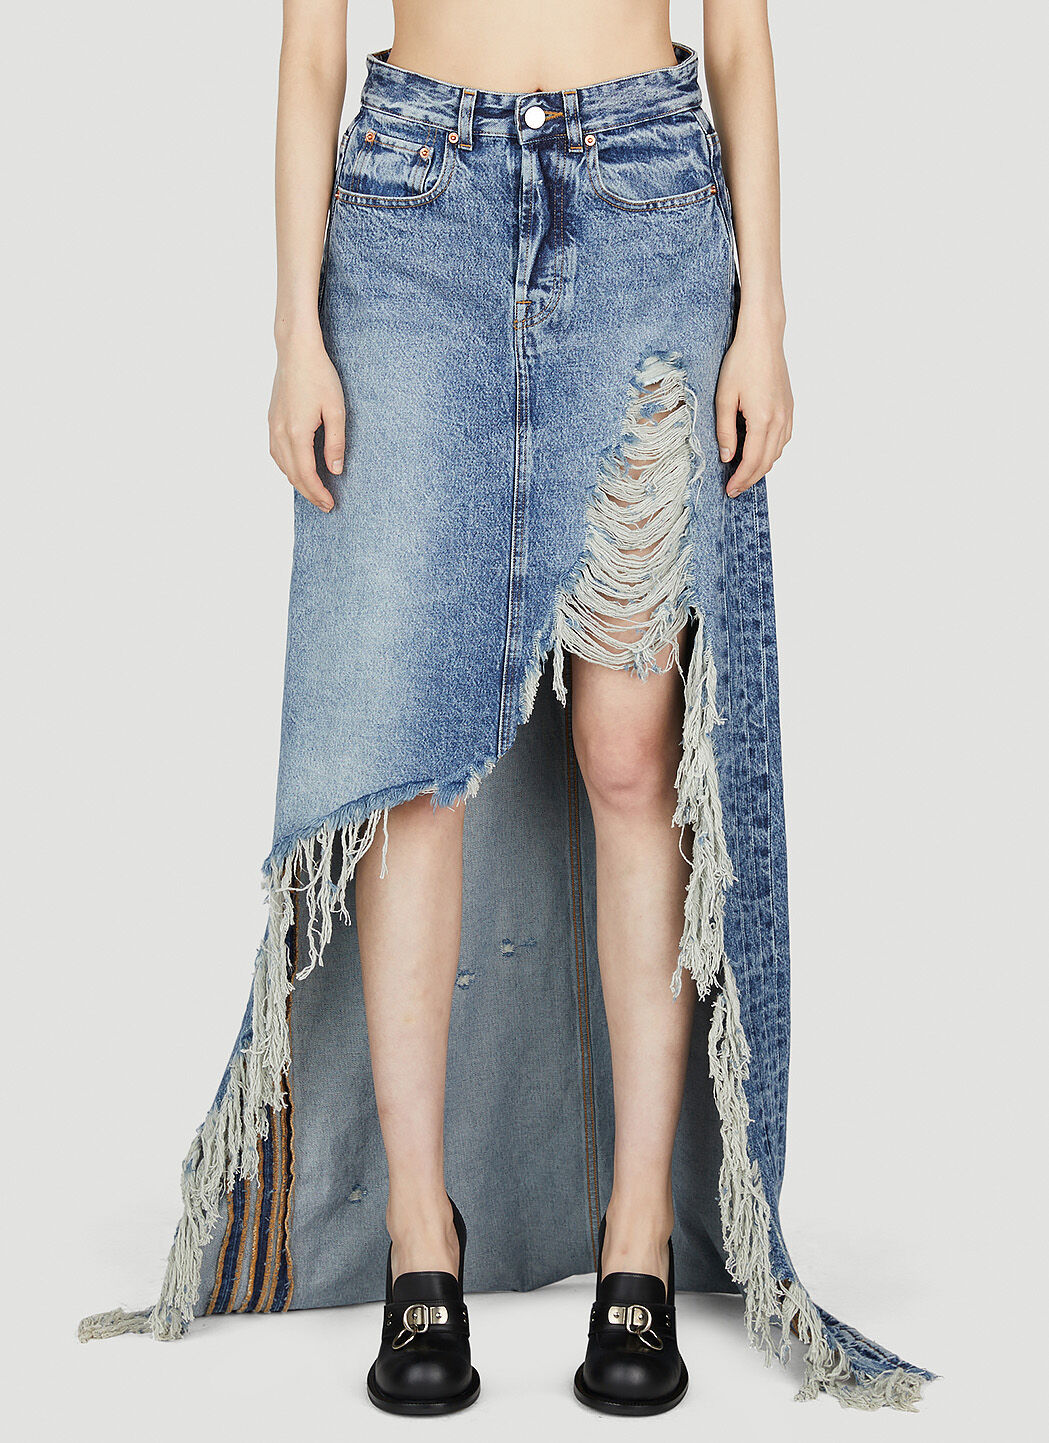 Distressed Denim Skirt in Blue GUESS